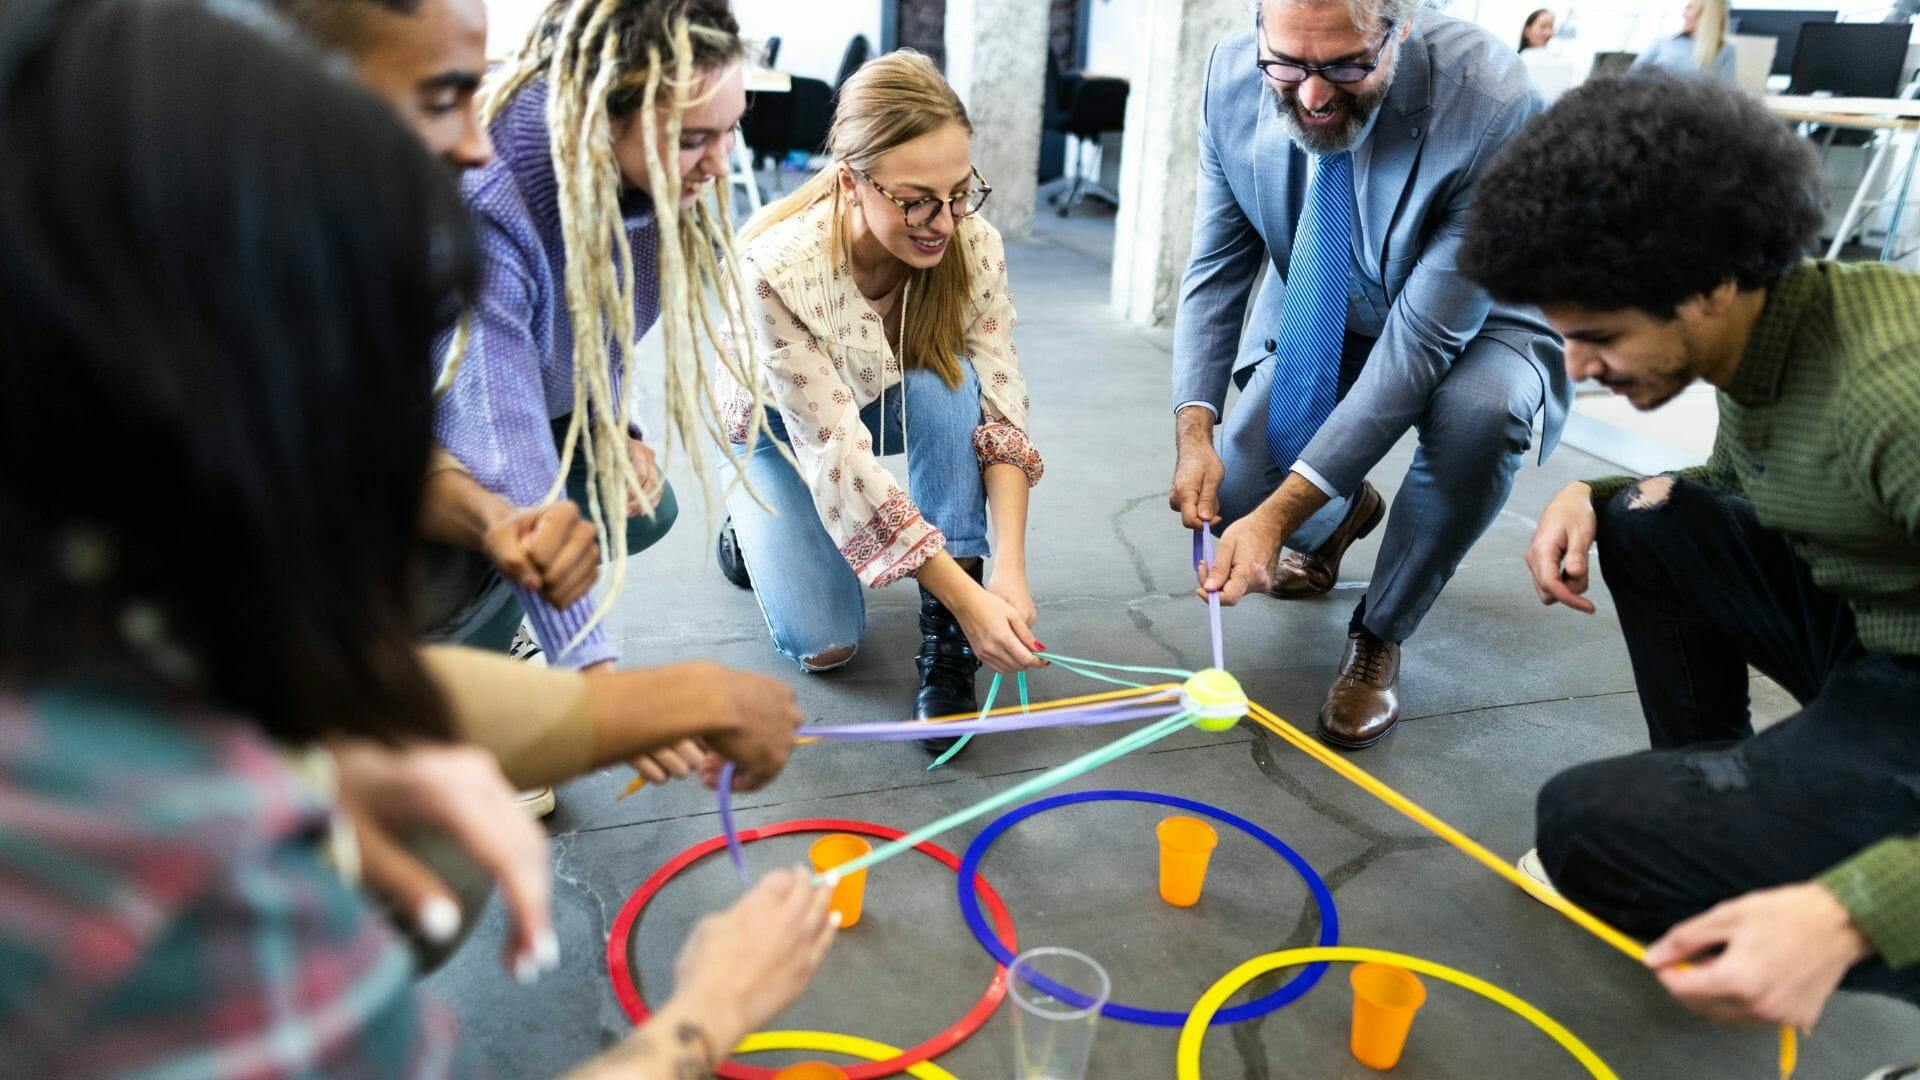 Effective Team Building: Top Activities for Cohesion